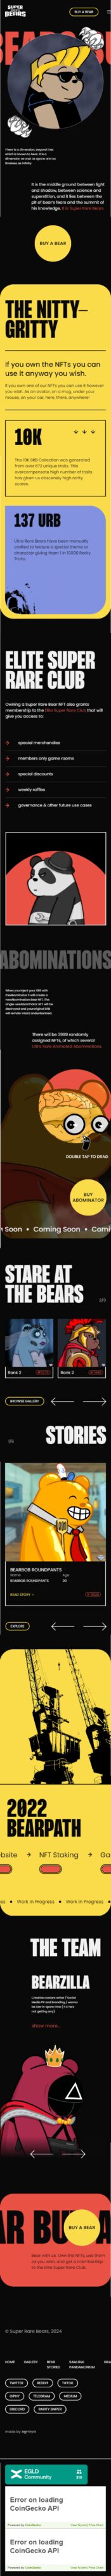 Superrarebears: nft collection web3 404 pages